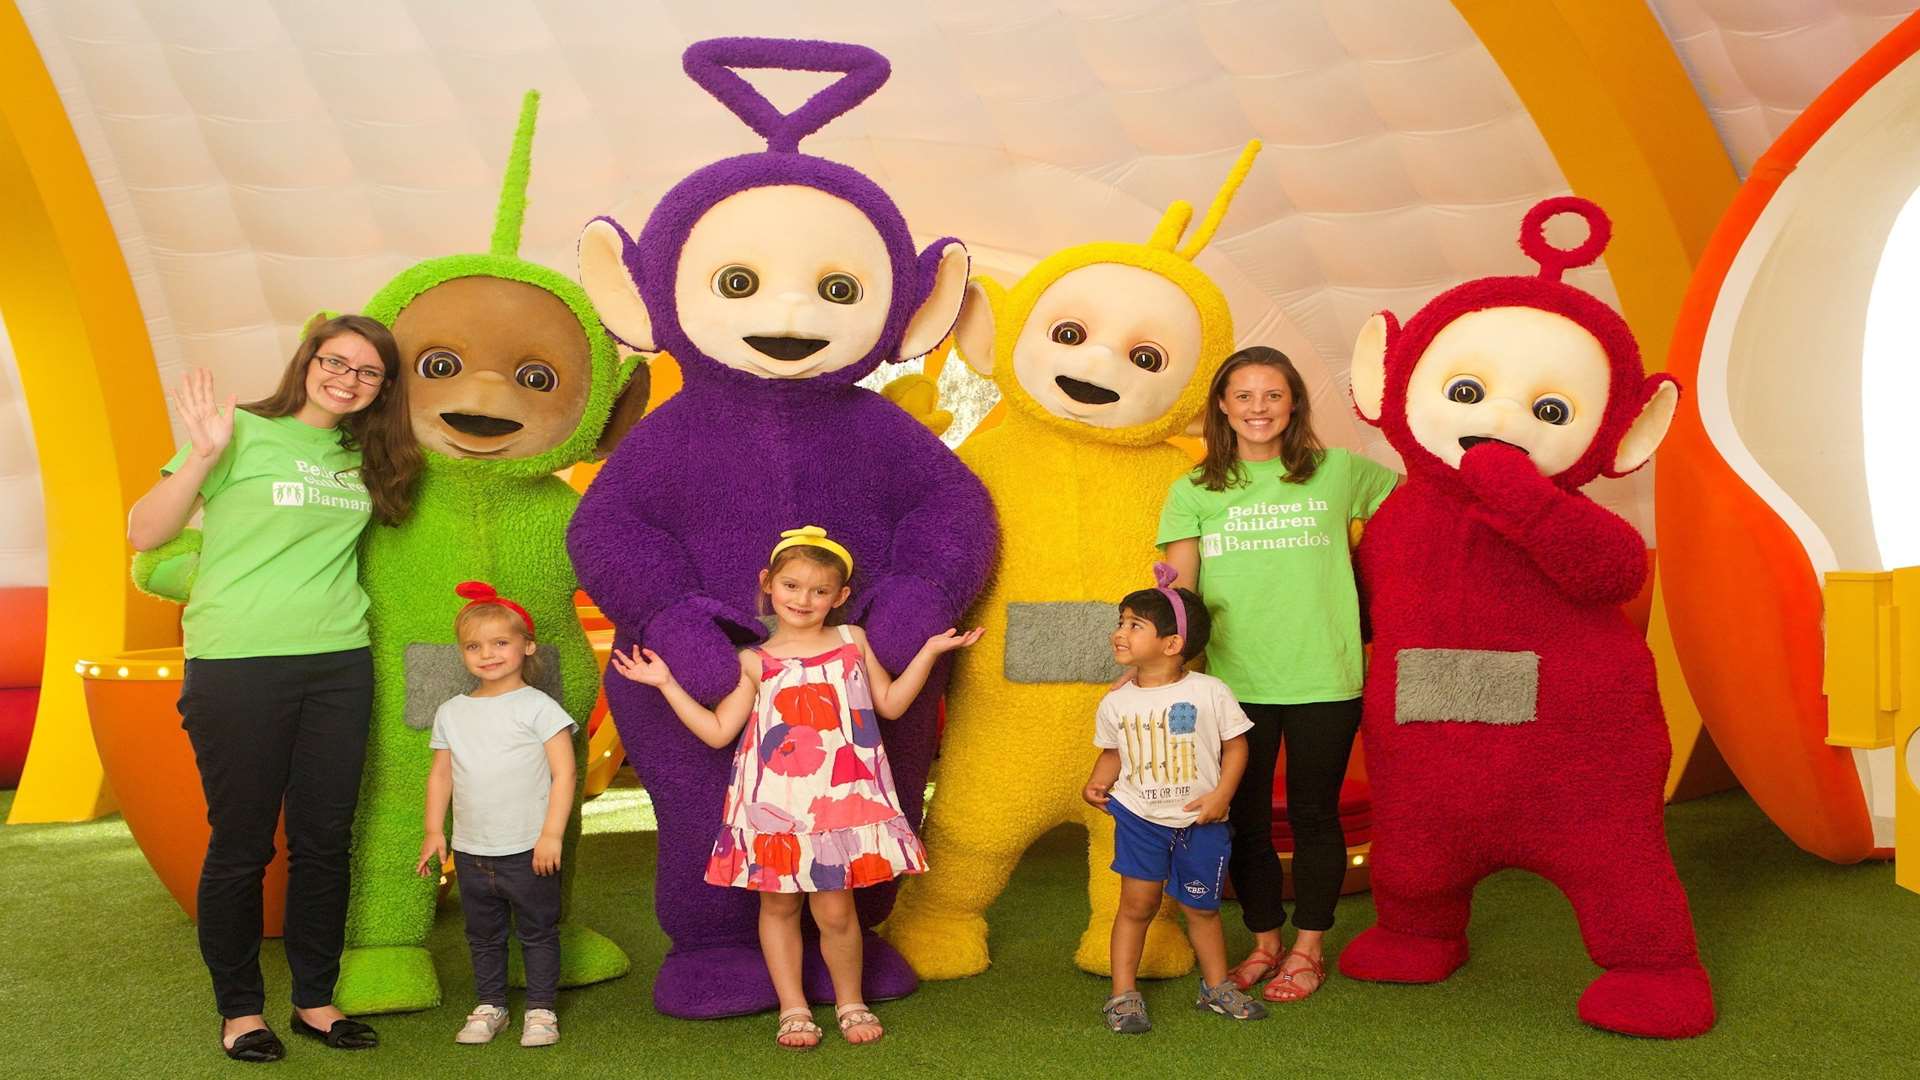 The Teletubbies have teamed up with Barnardo's for this year's Big Toddle